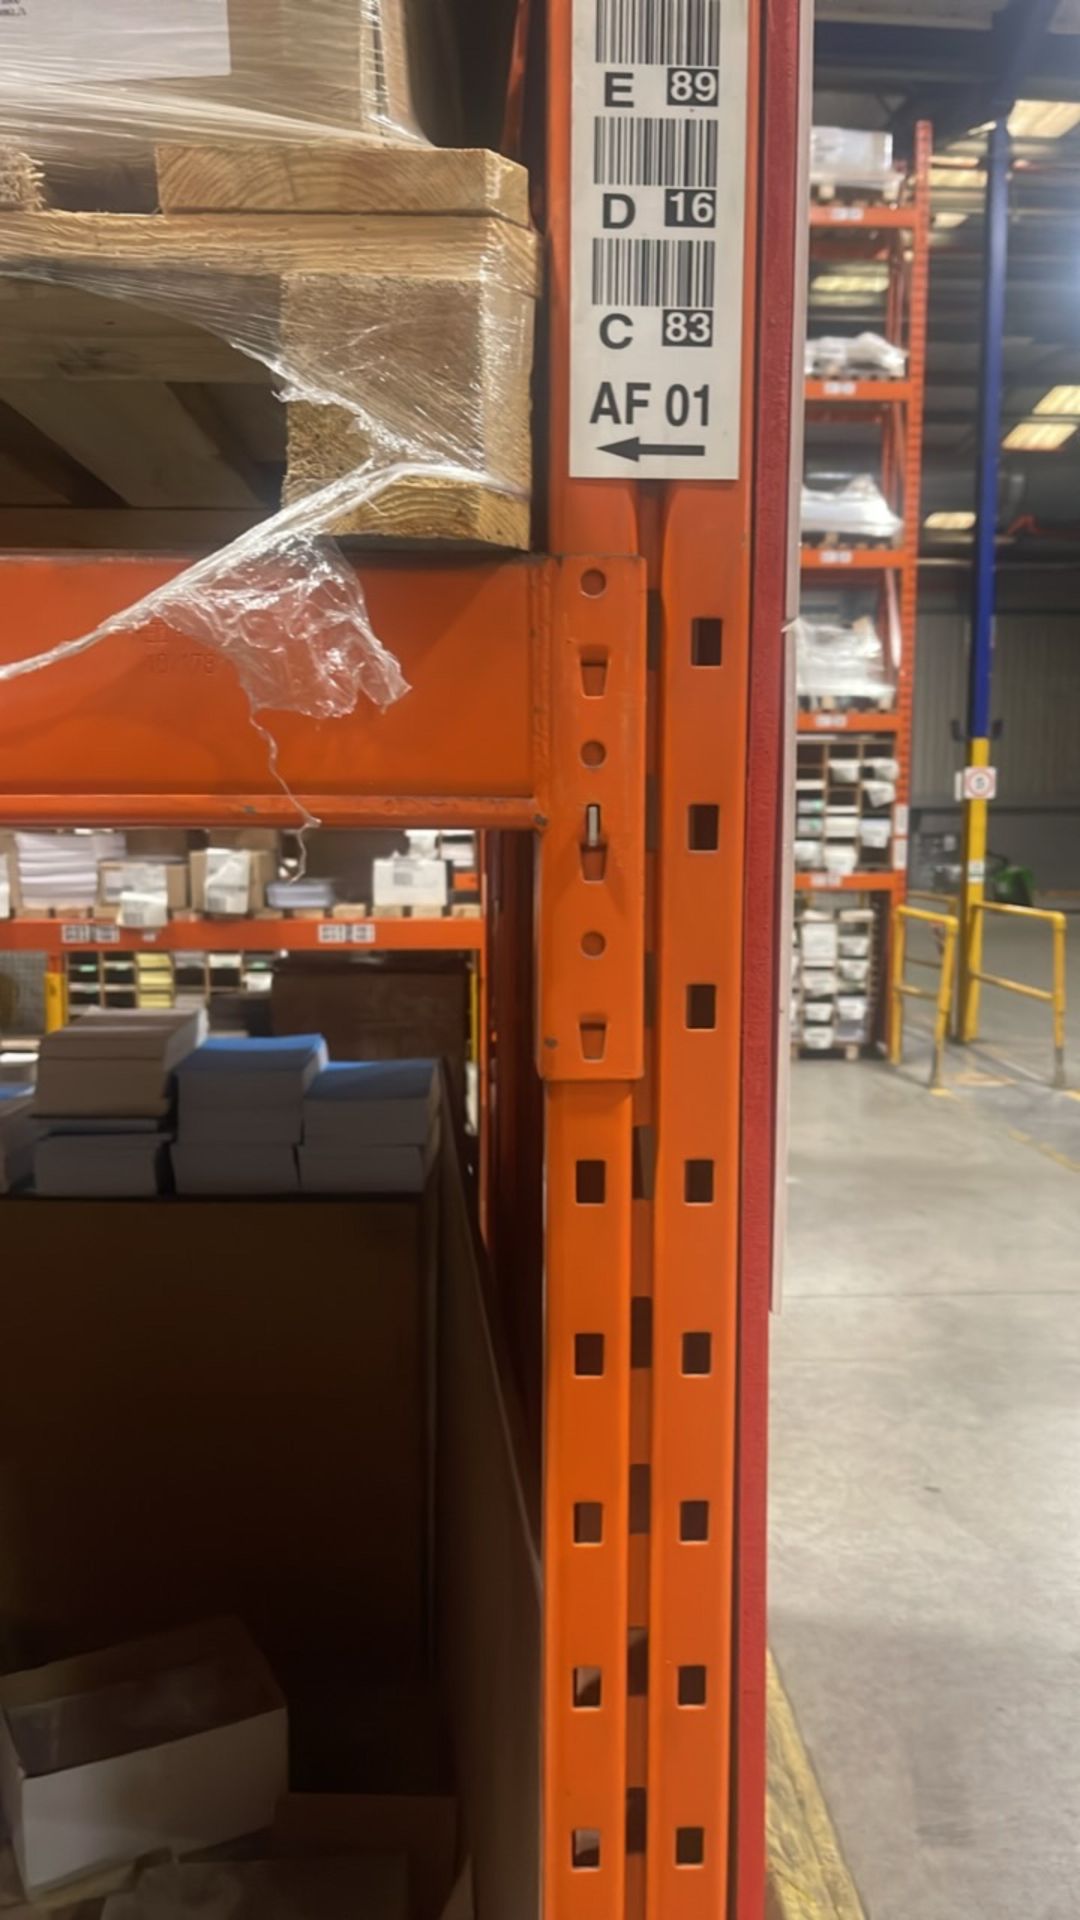 ref 4 - 23 Bays Of Boltless Pallet Racking - Image 7 of 9